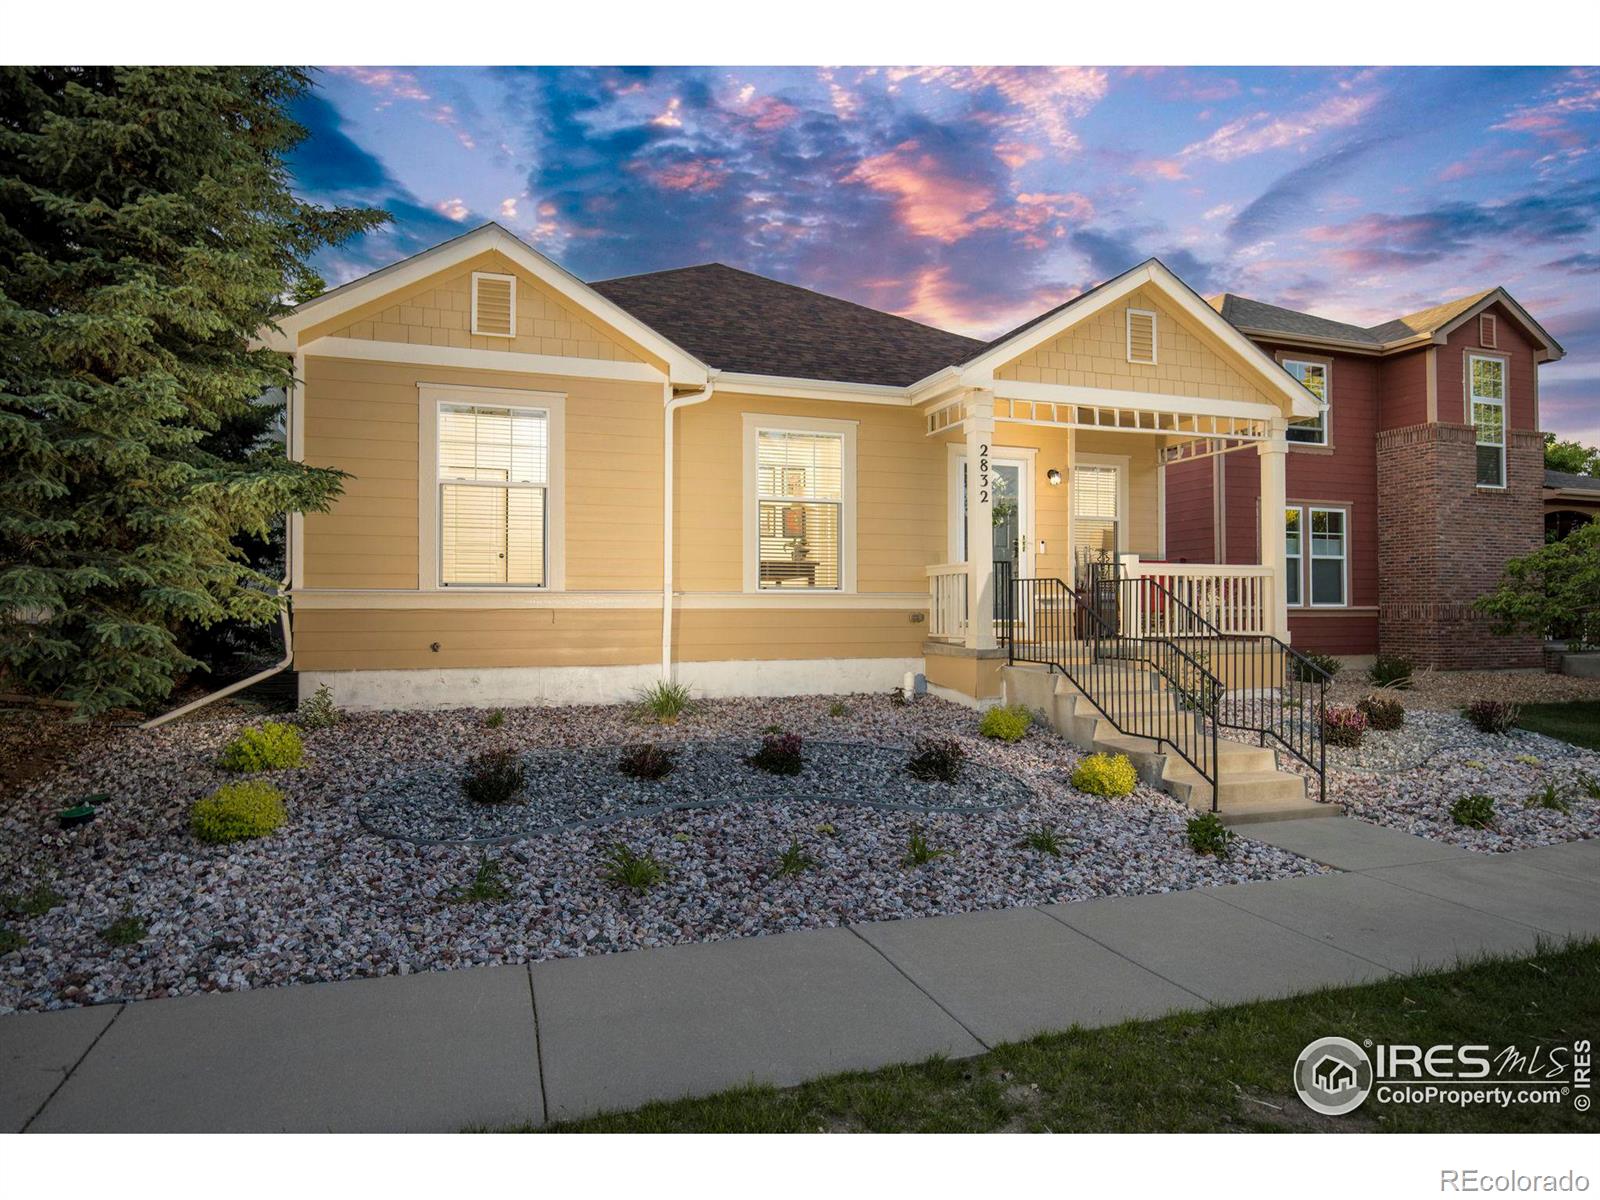 2832  County Fair Lane, fort collins MLS: 4567891010554 Beds: 4 Baths: 3 Price: $650,000